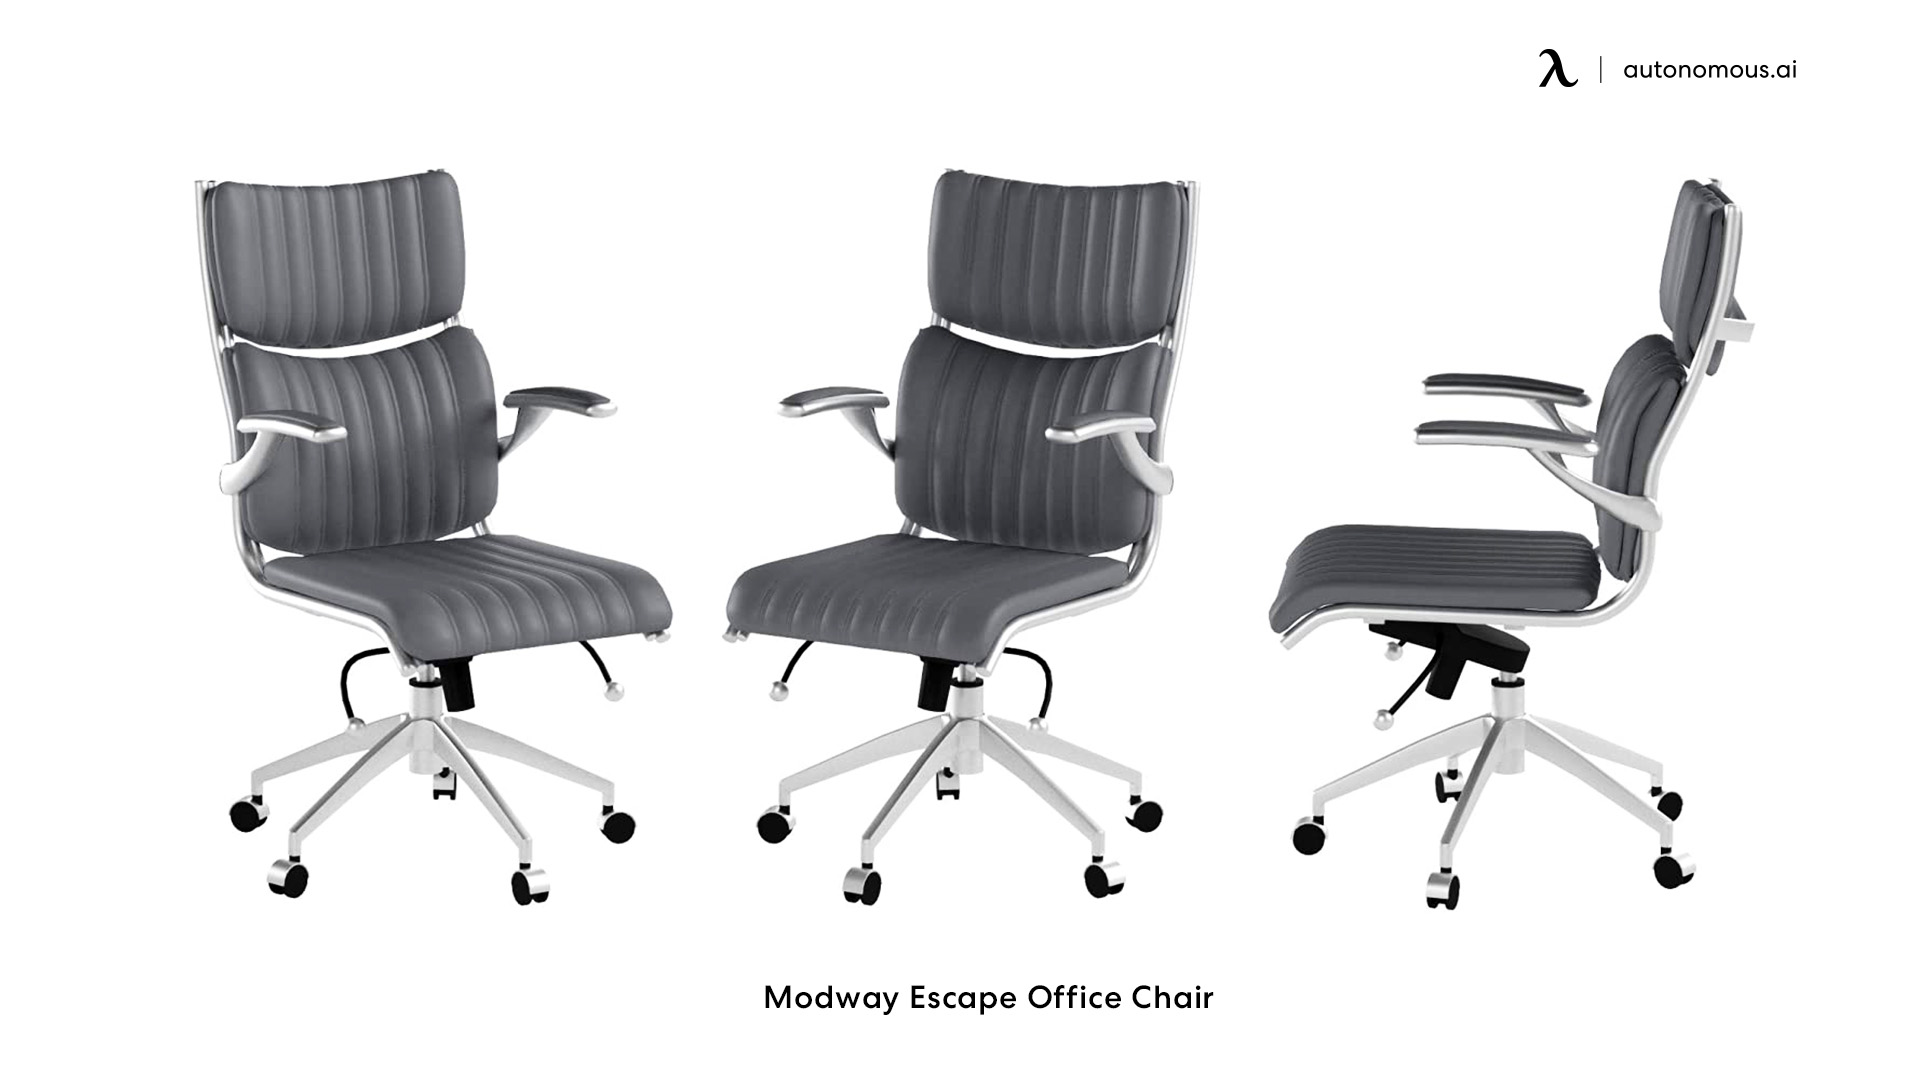 Modway Escape white and grey office chair